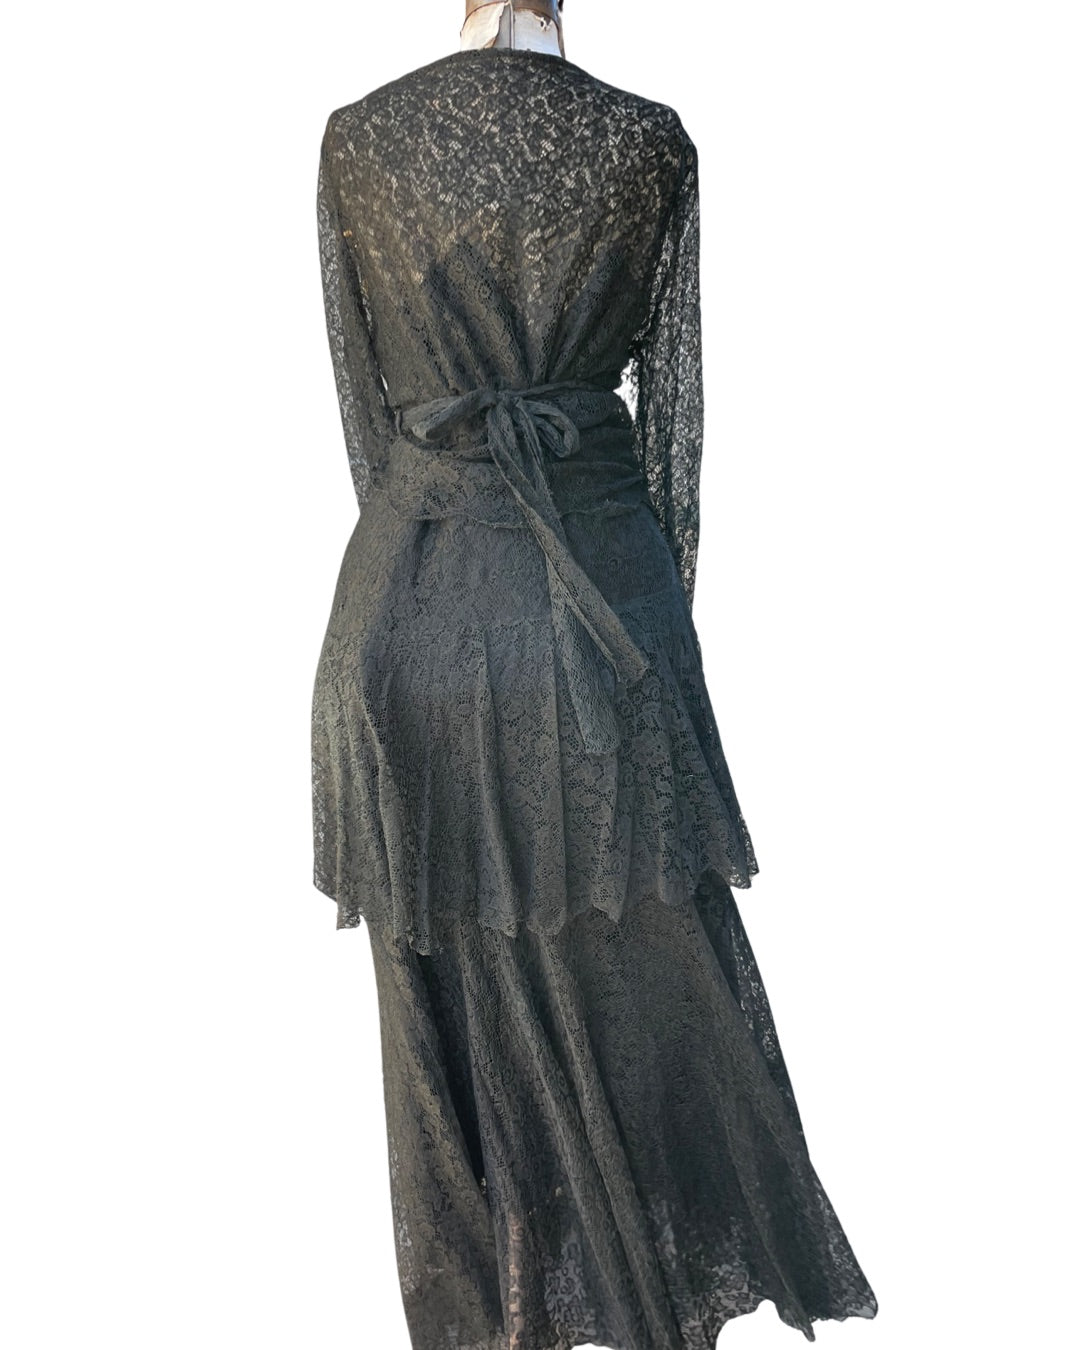 1920s/30s Full Lace Wrap Style Tiered Dress